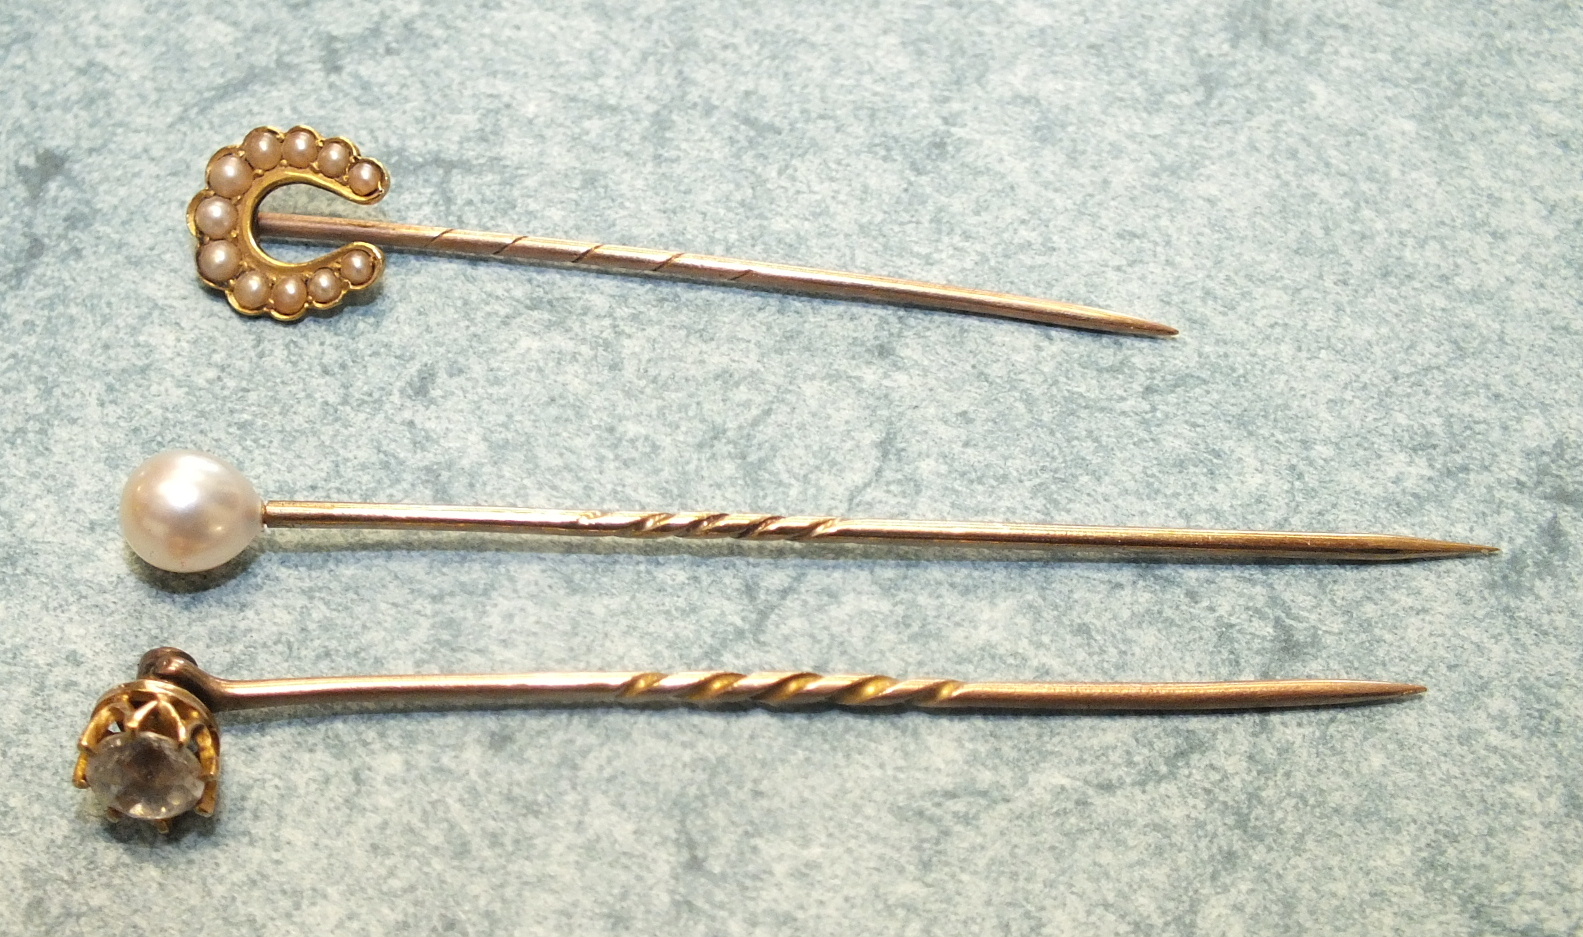 Three 19th century stick pins, one set a white paste stone, one a cultured pearl and one a pearl set